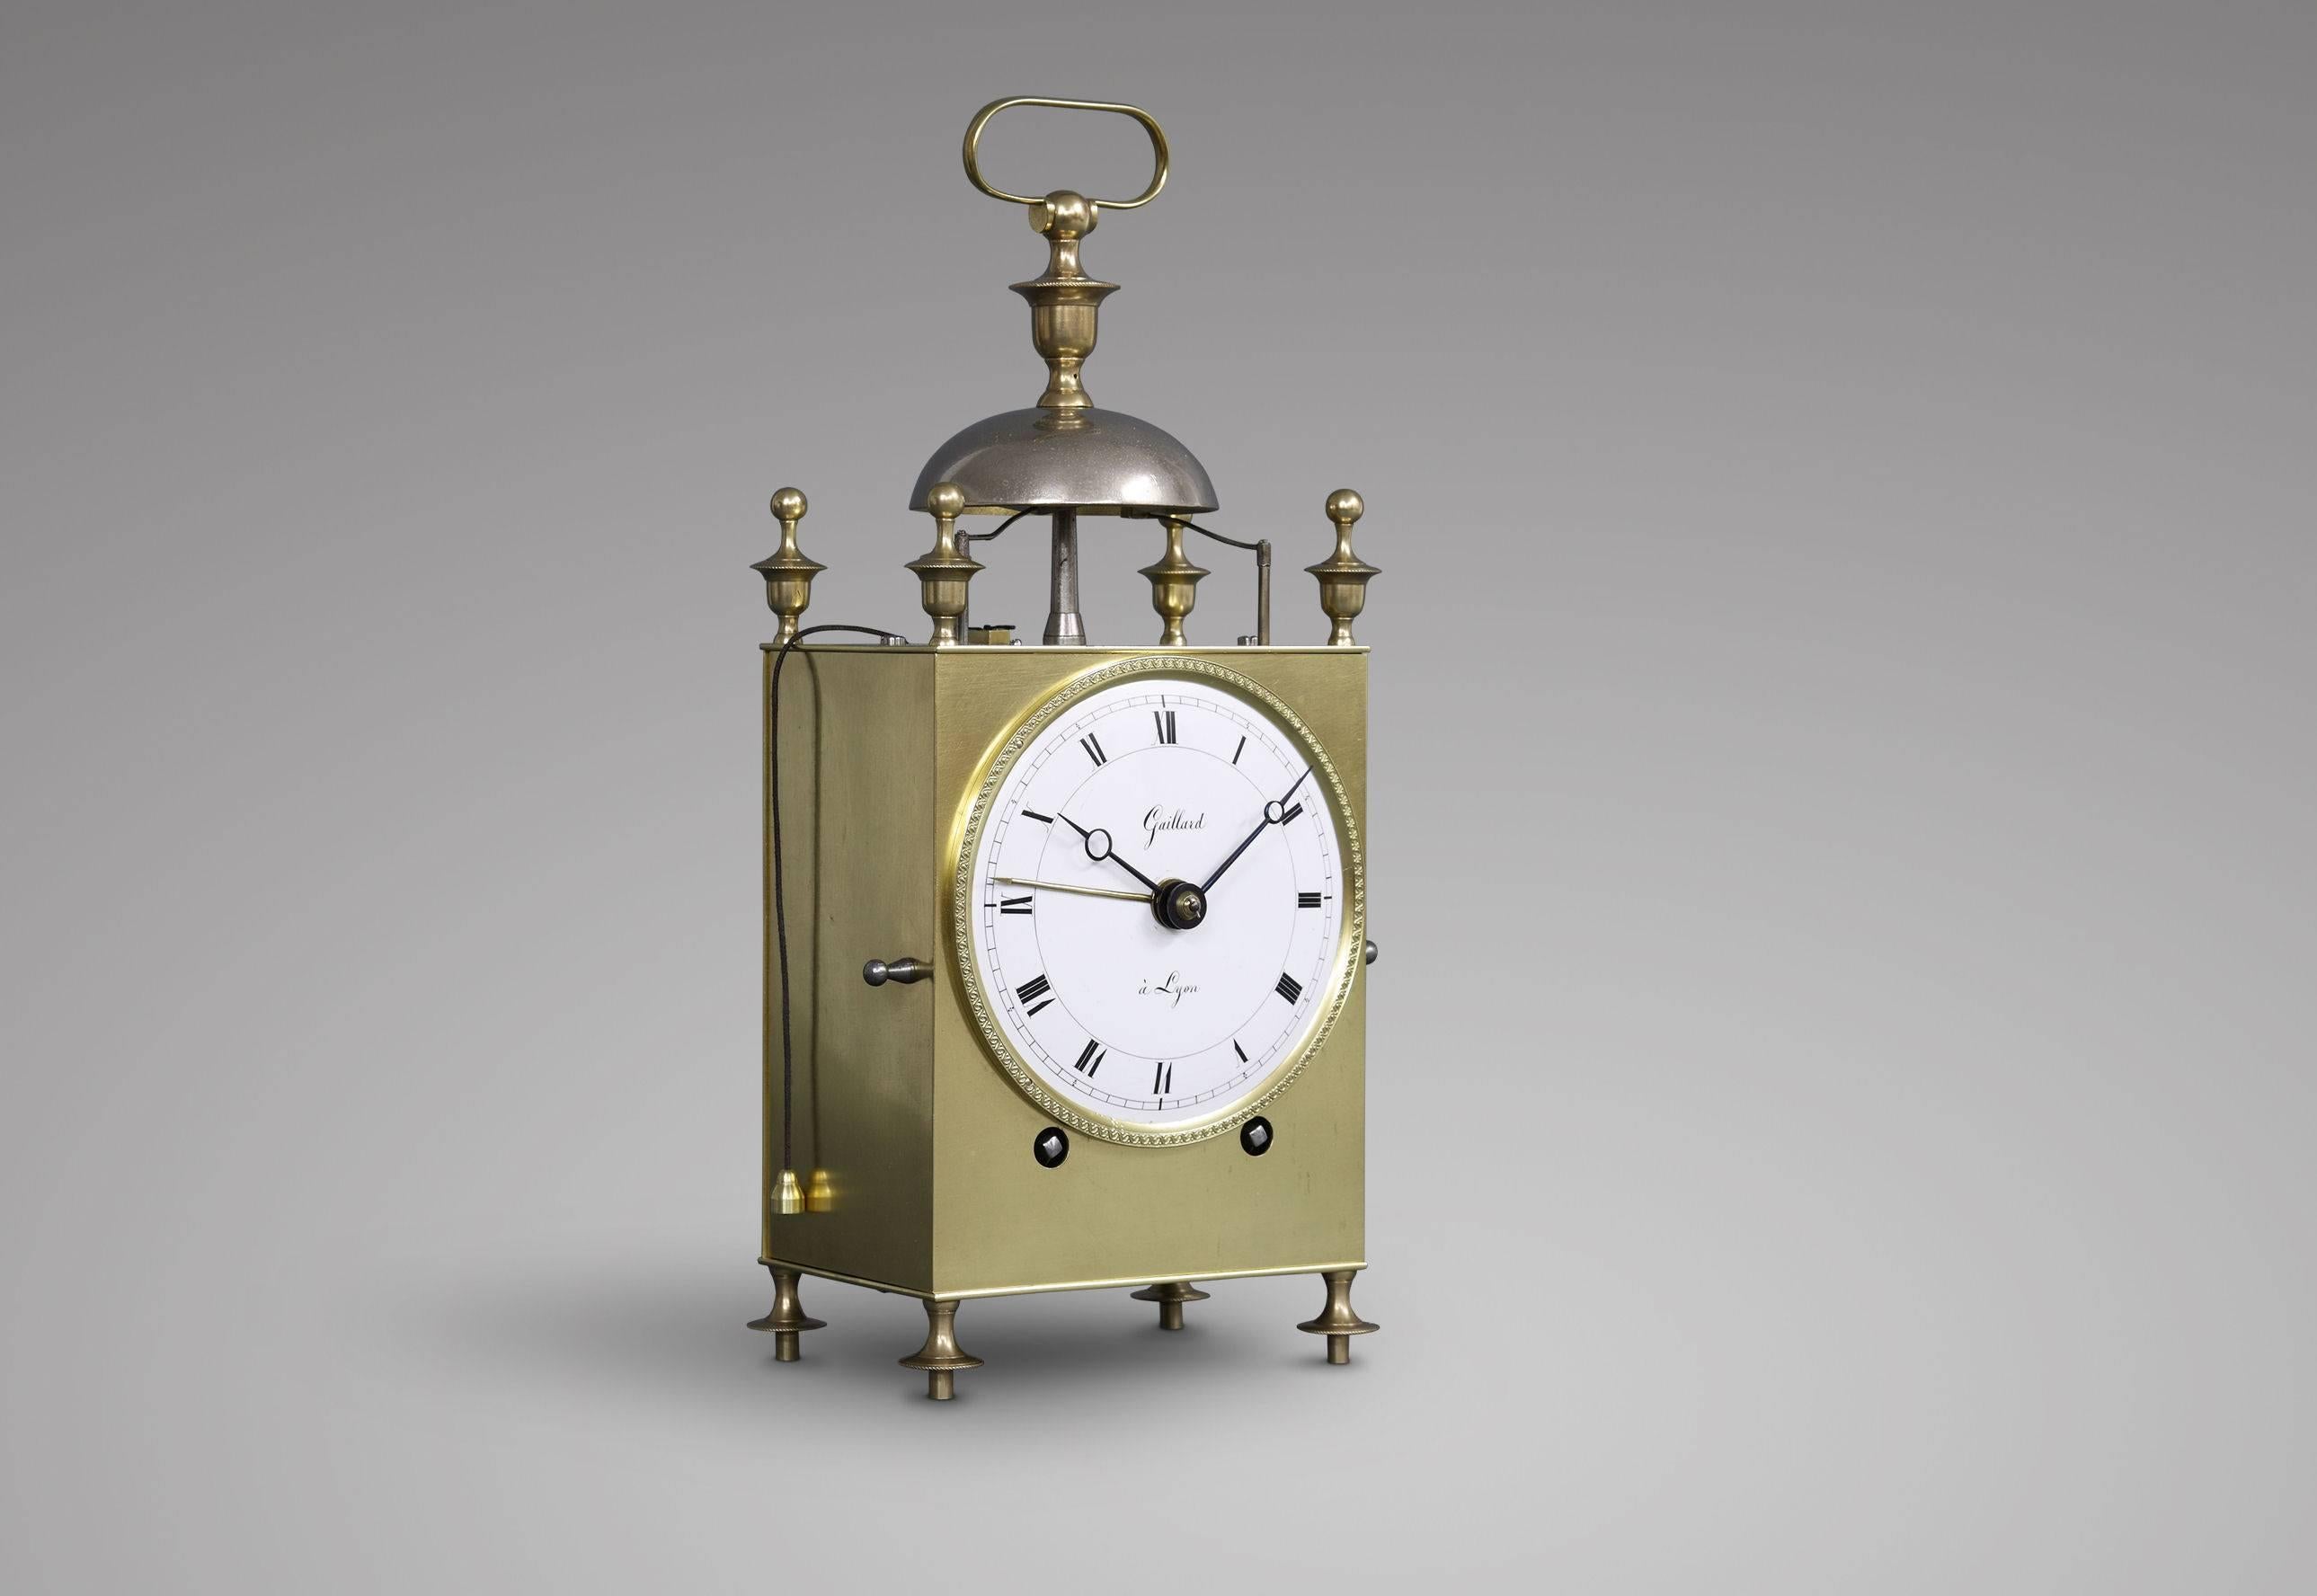 Early 19th century French Capucine, enamel dial with Roman numerals and signature Gaillard à Lyon. Double rack strike on the hour and two minutes past the hour, single half-hourly strike on a sivered bell. Alarm set by a third hand on the dial.